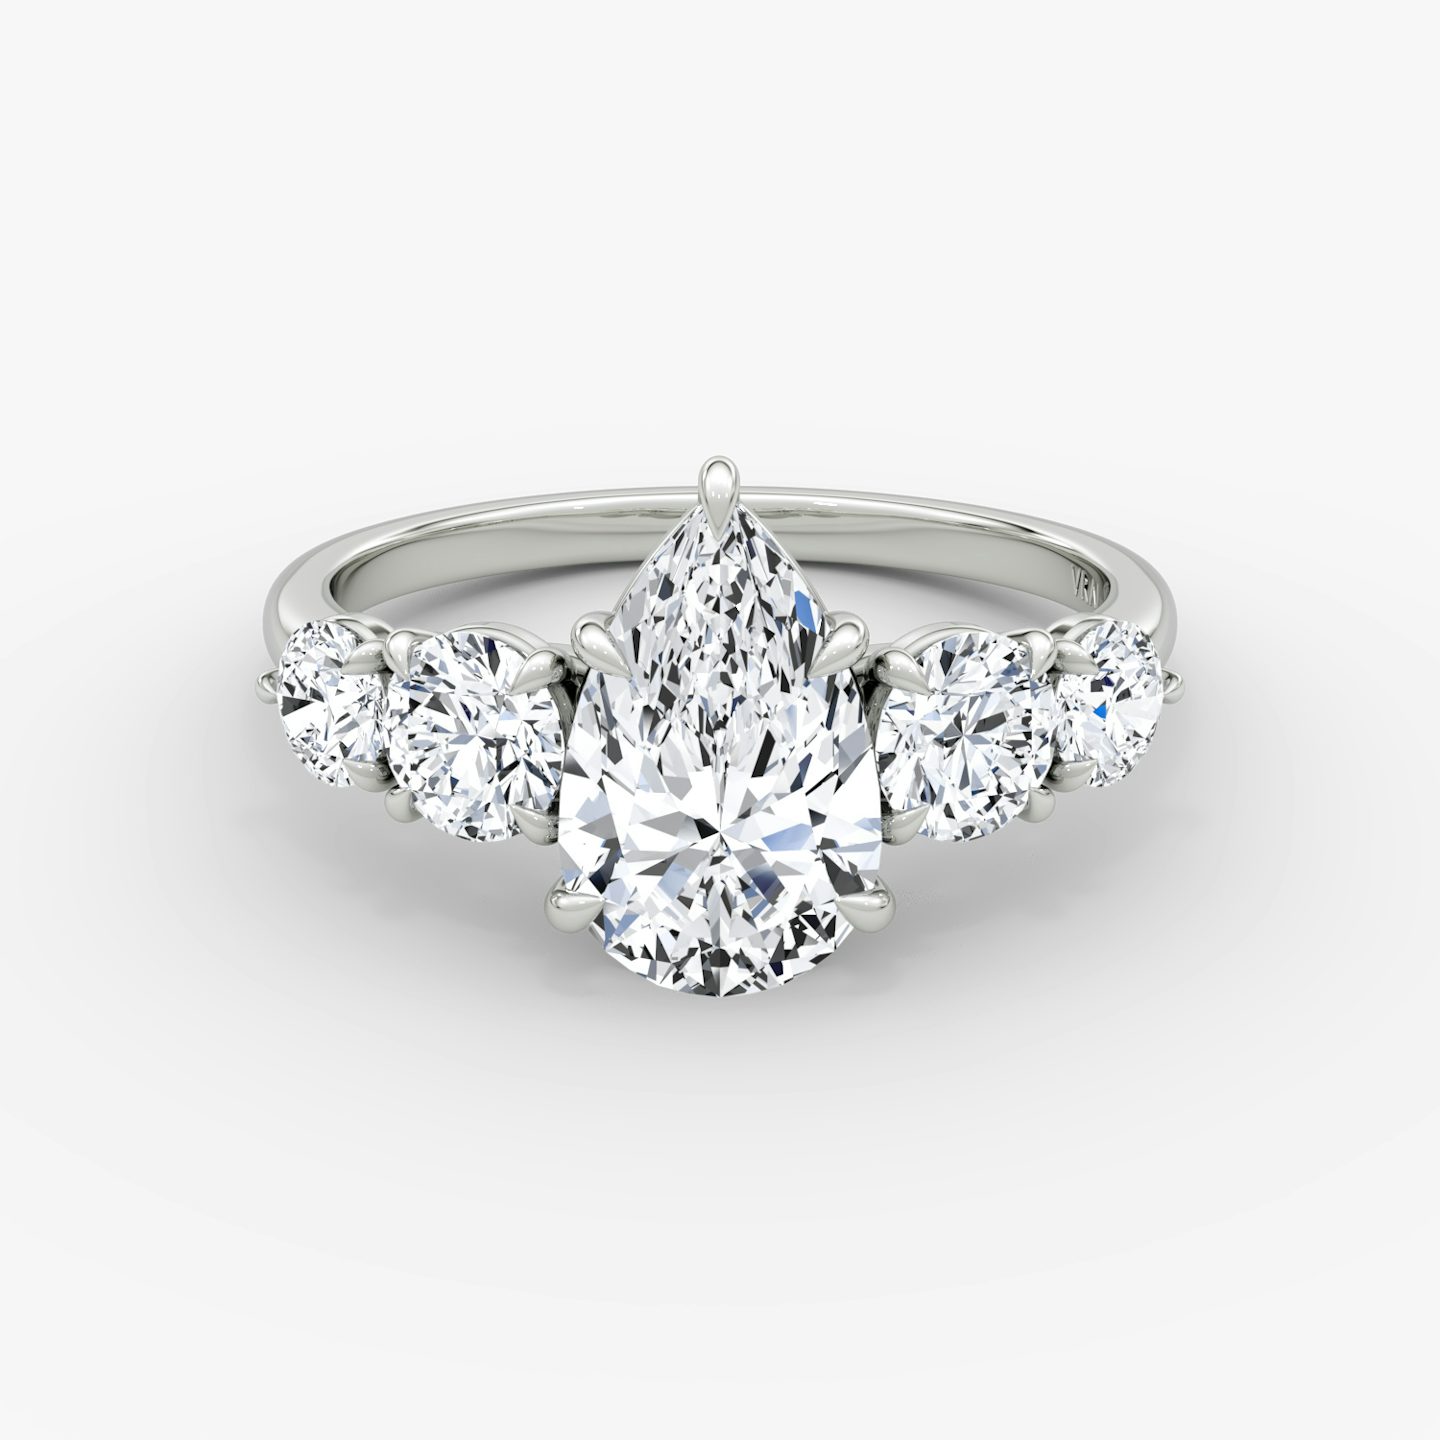 undefined | Poire | 18k | Or blanc | bandAccent: Simple | diamondOrientation: vertical | caratWeight: other